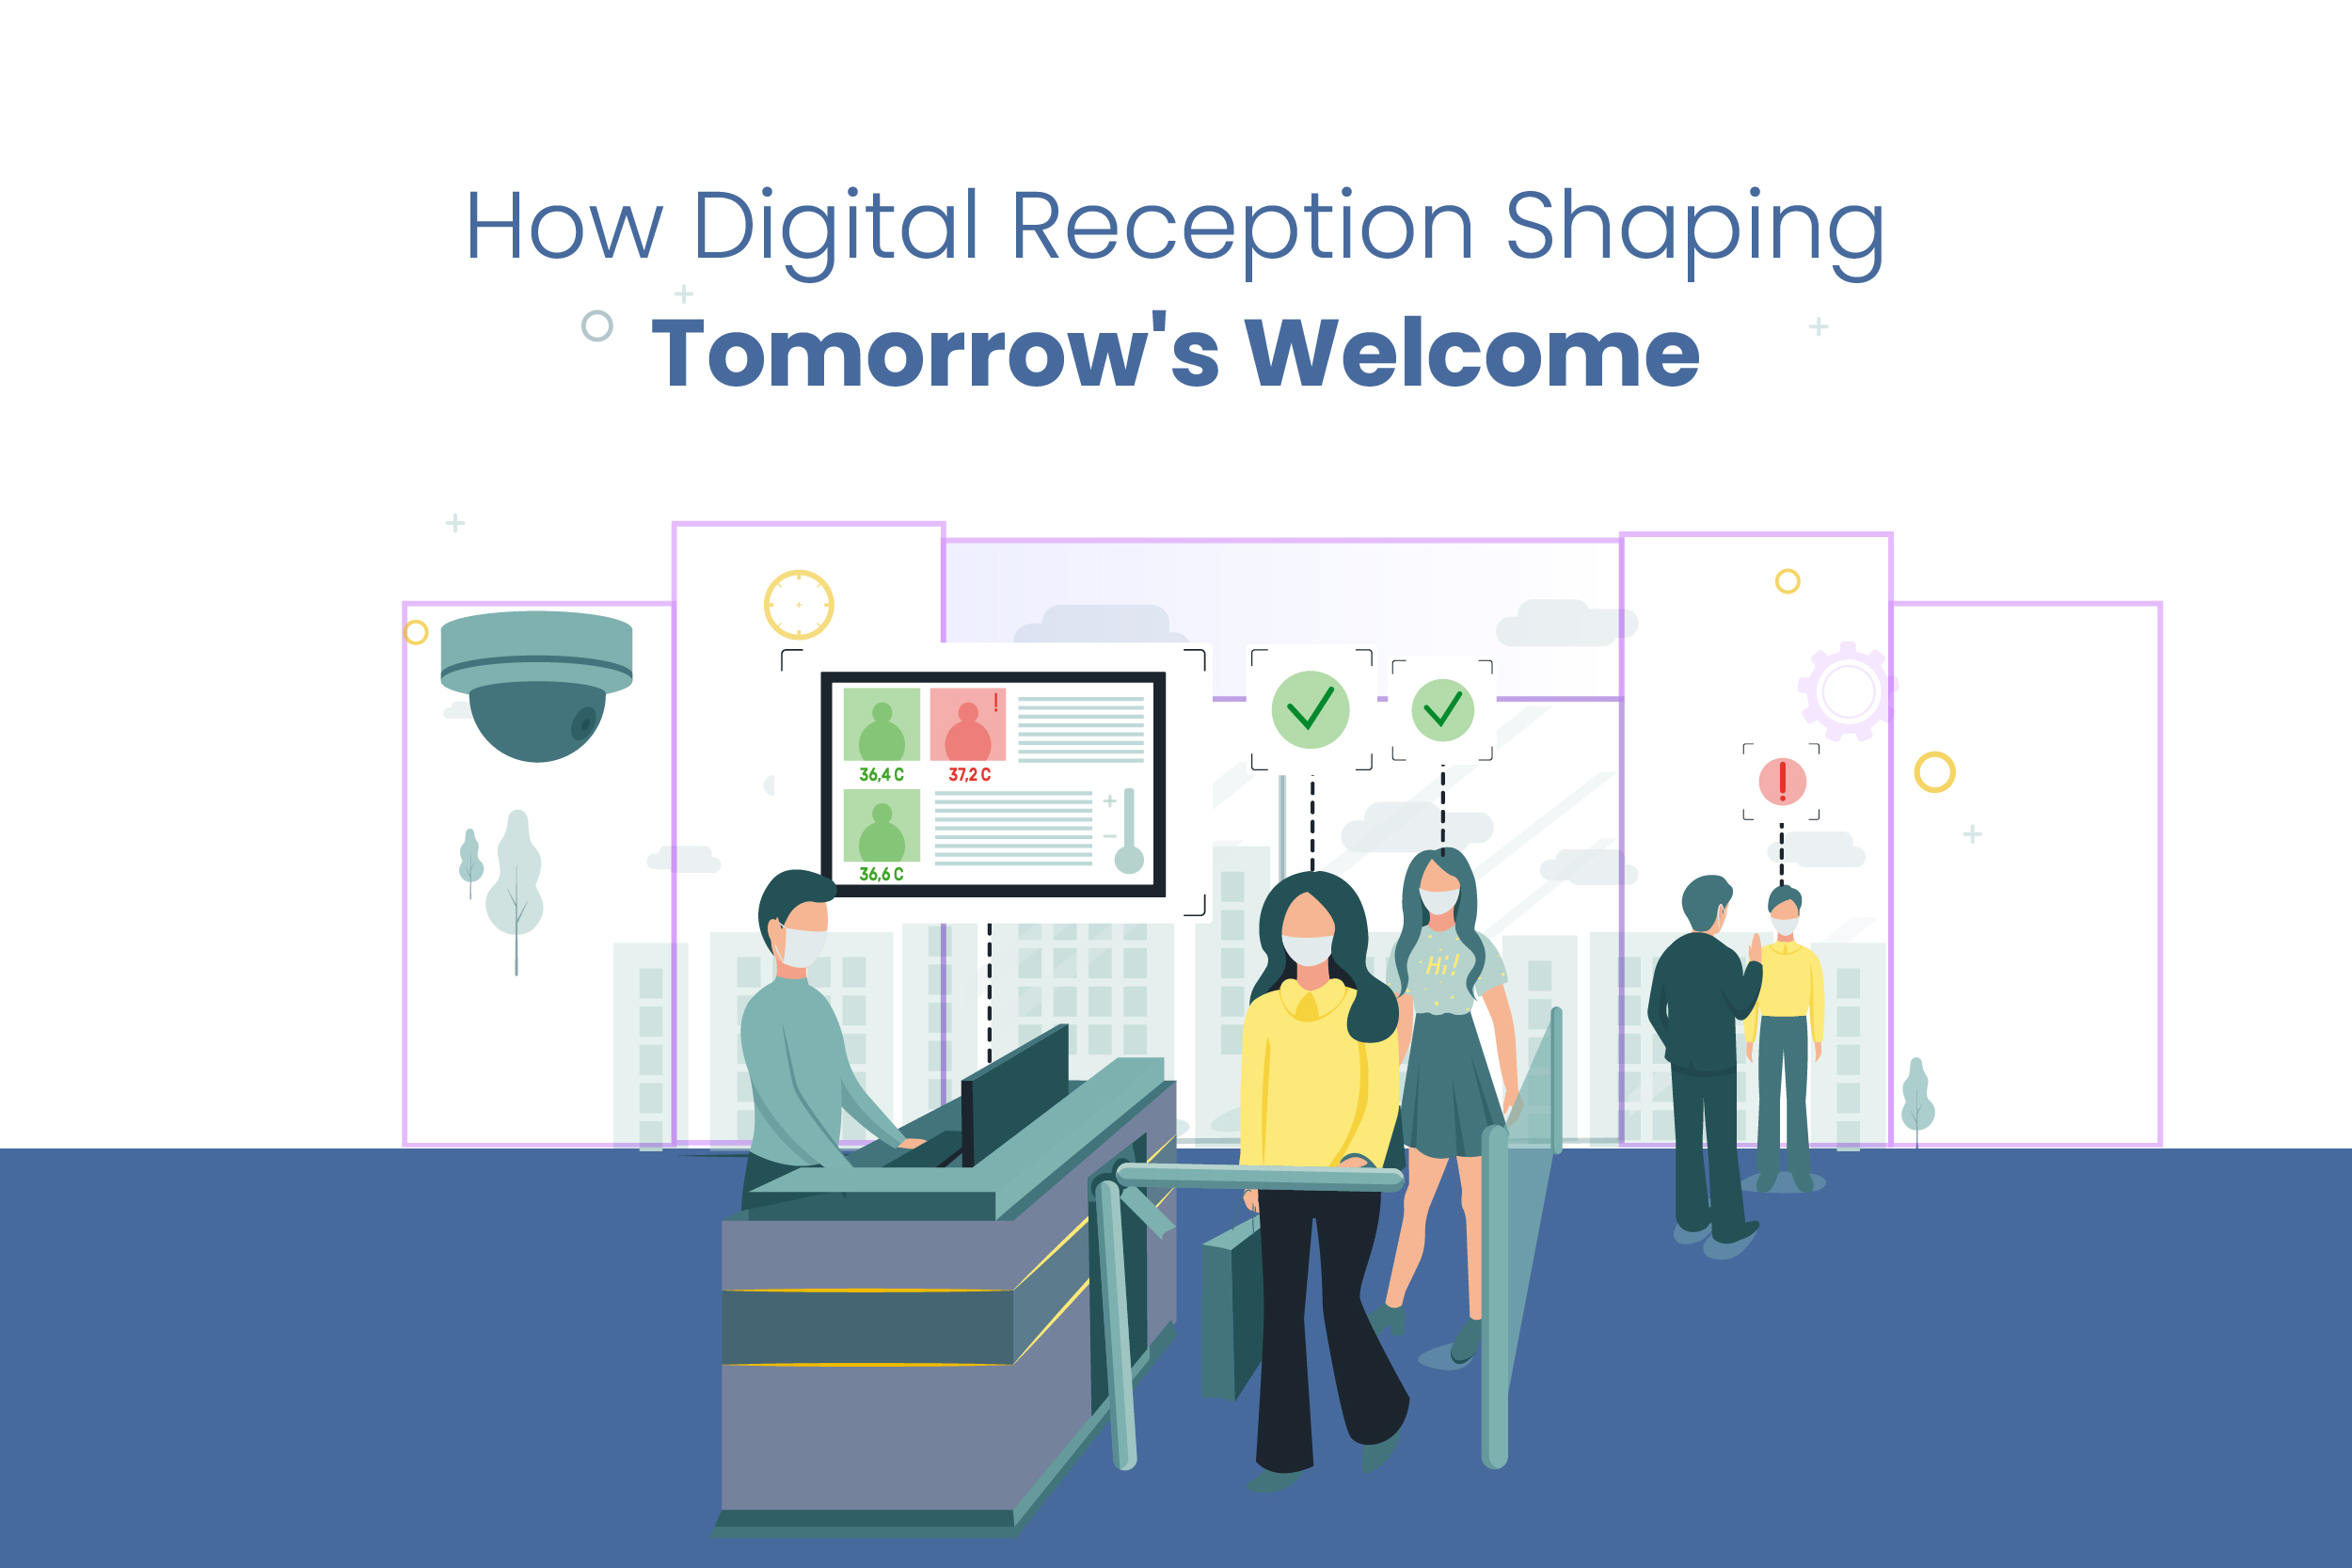 How Digital Reception Shaping Tomorrow’s Welcome